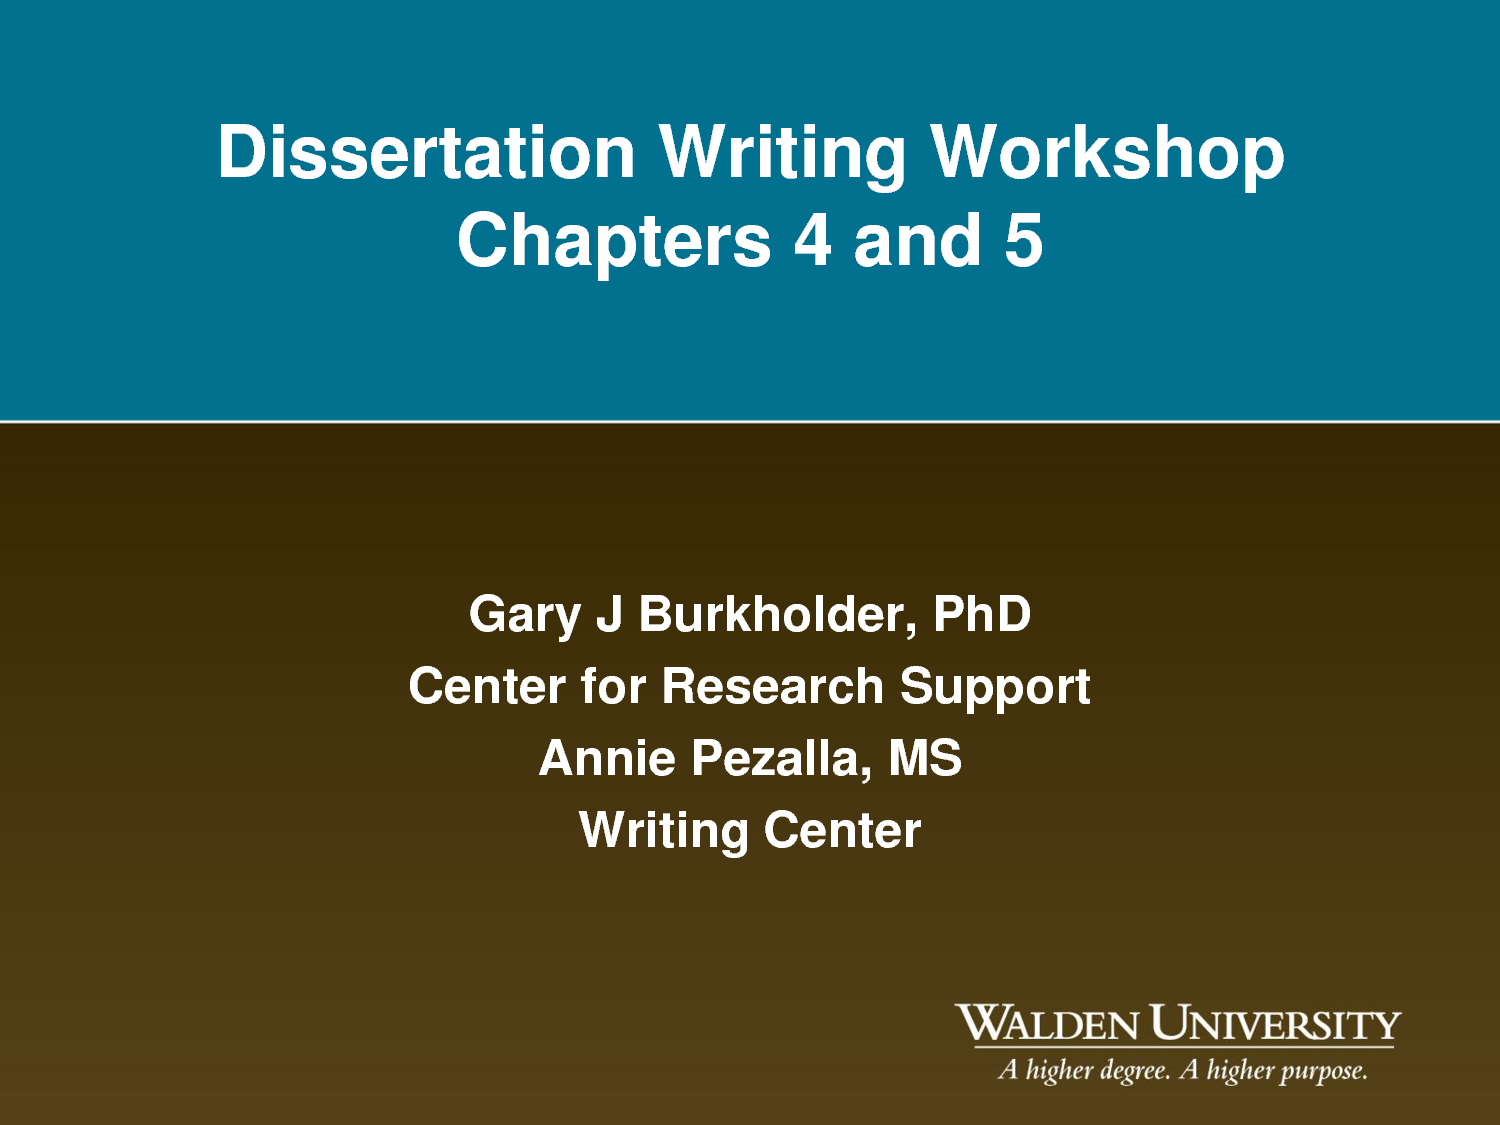 Pay for performance dissertation